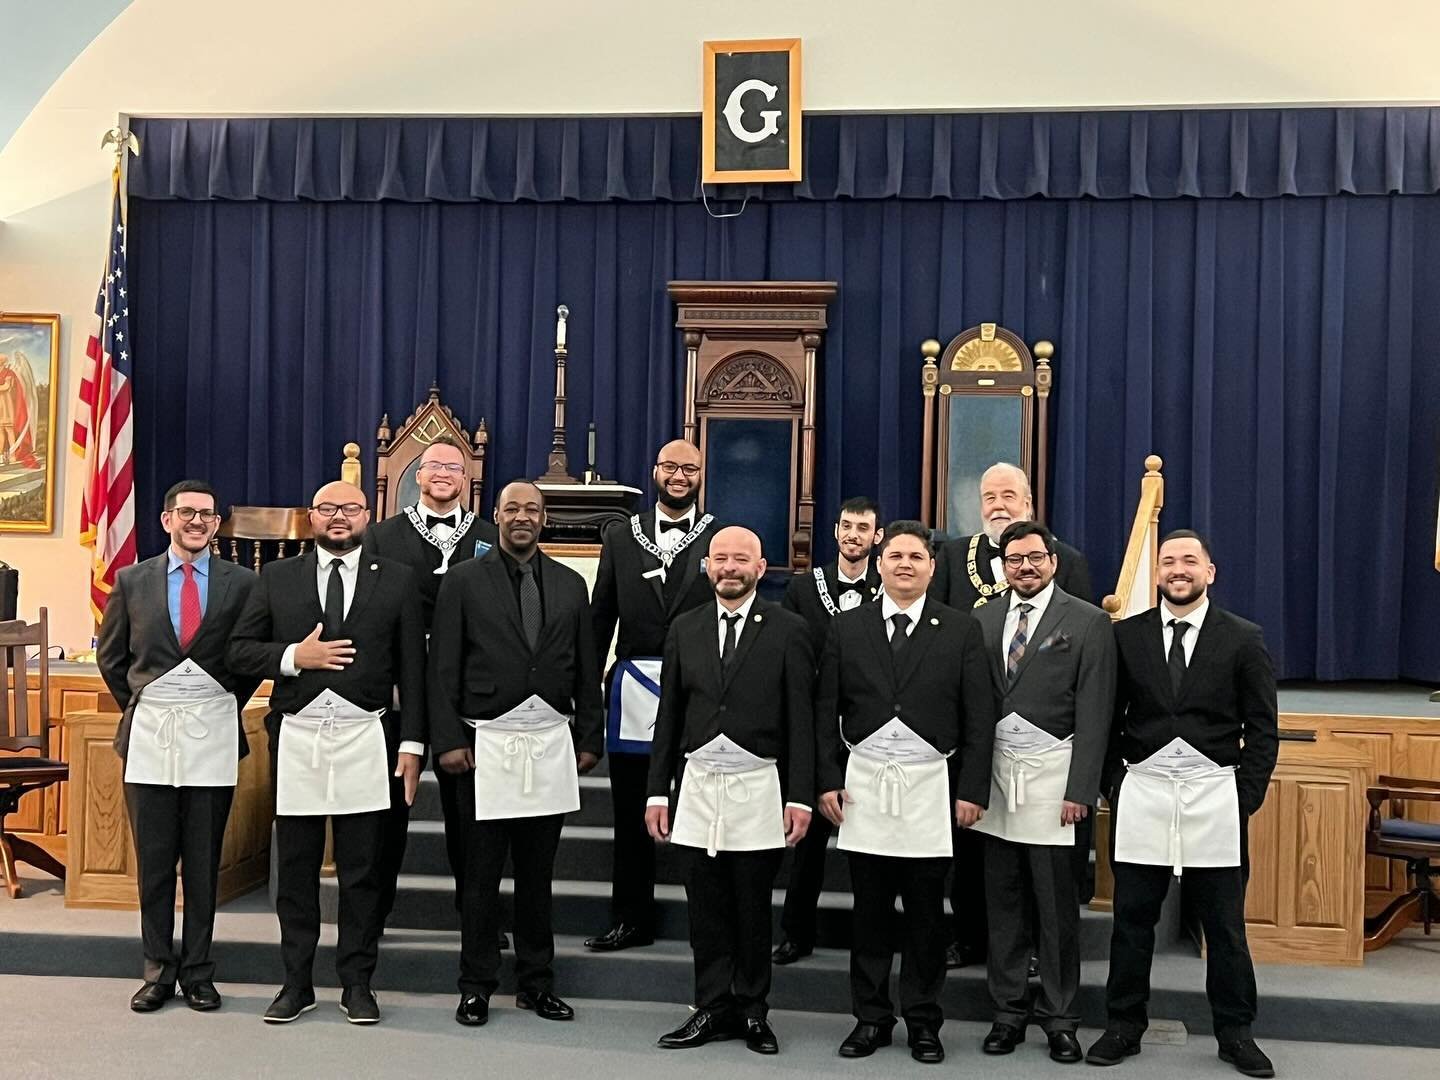 Congratulations to the newest 7 Entered Apprentices of Essex Lodge.